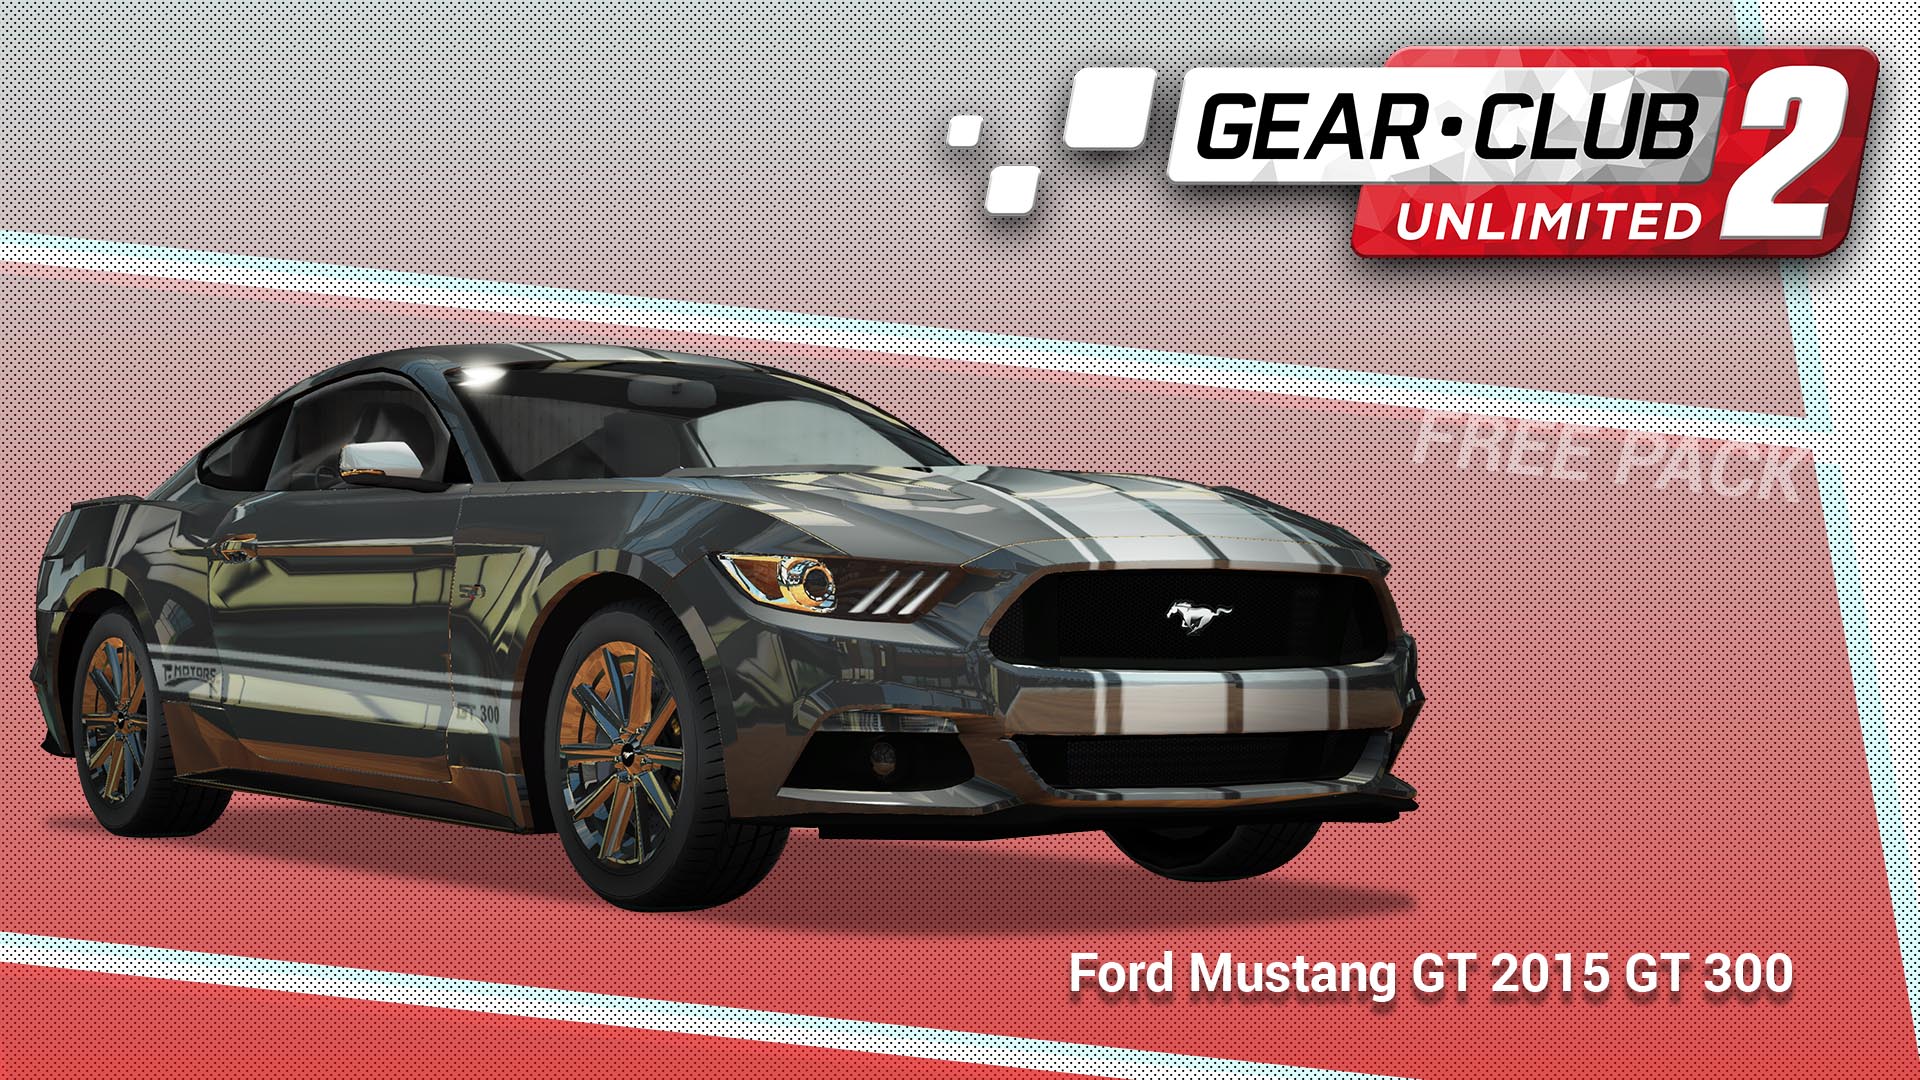 Ford Mustang GT 2015 GT 300 - Gear.Club Unlimited 2